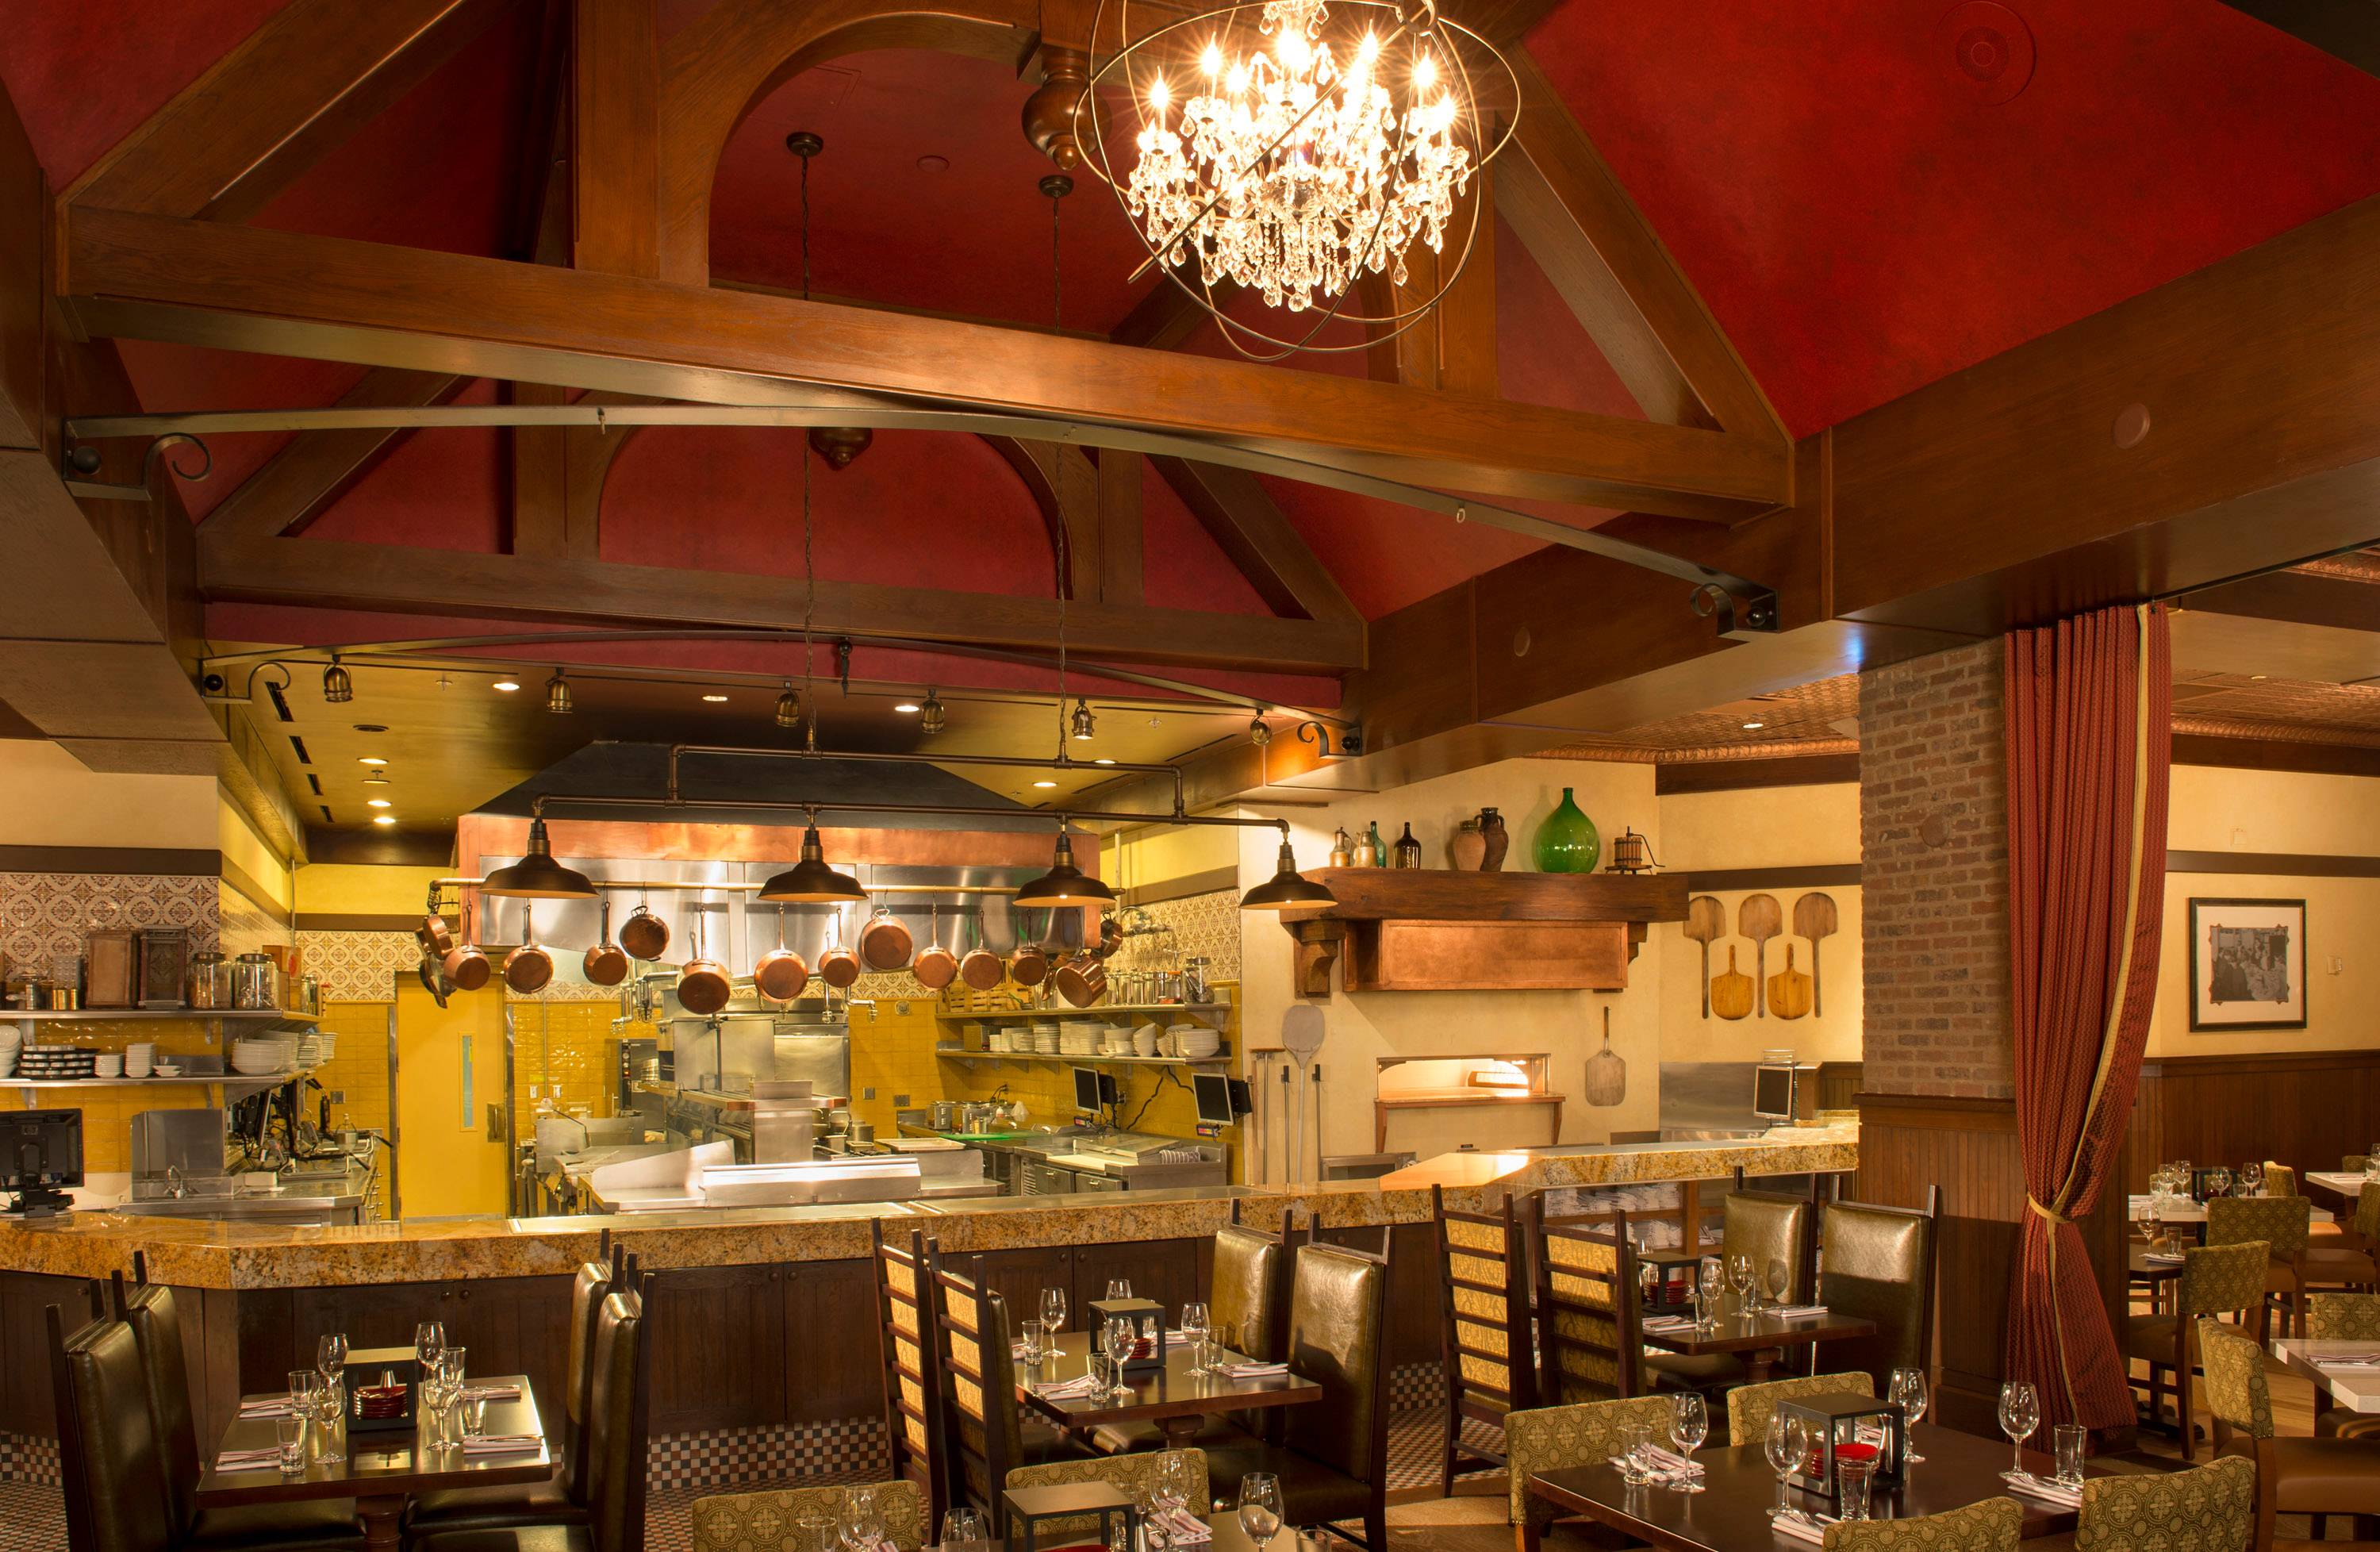 PHOTOS - A look inside the dining room at Trattoria al Forno on Disney's BoardWalk